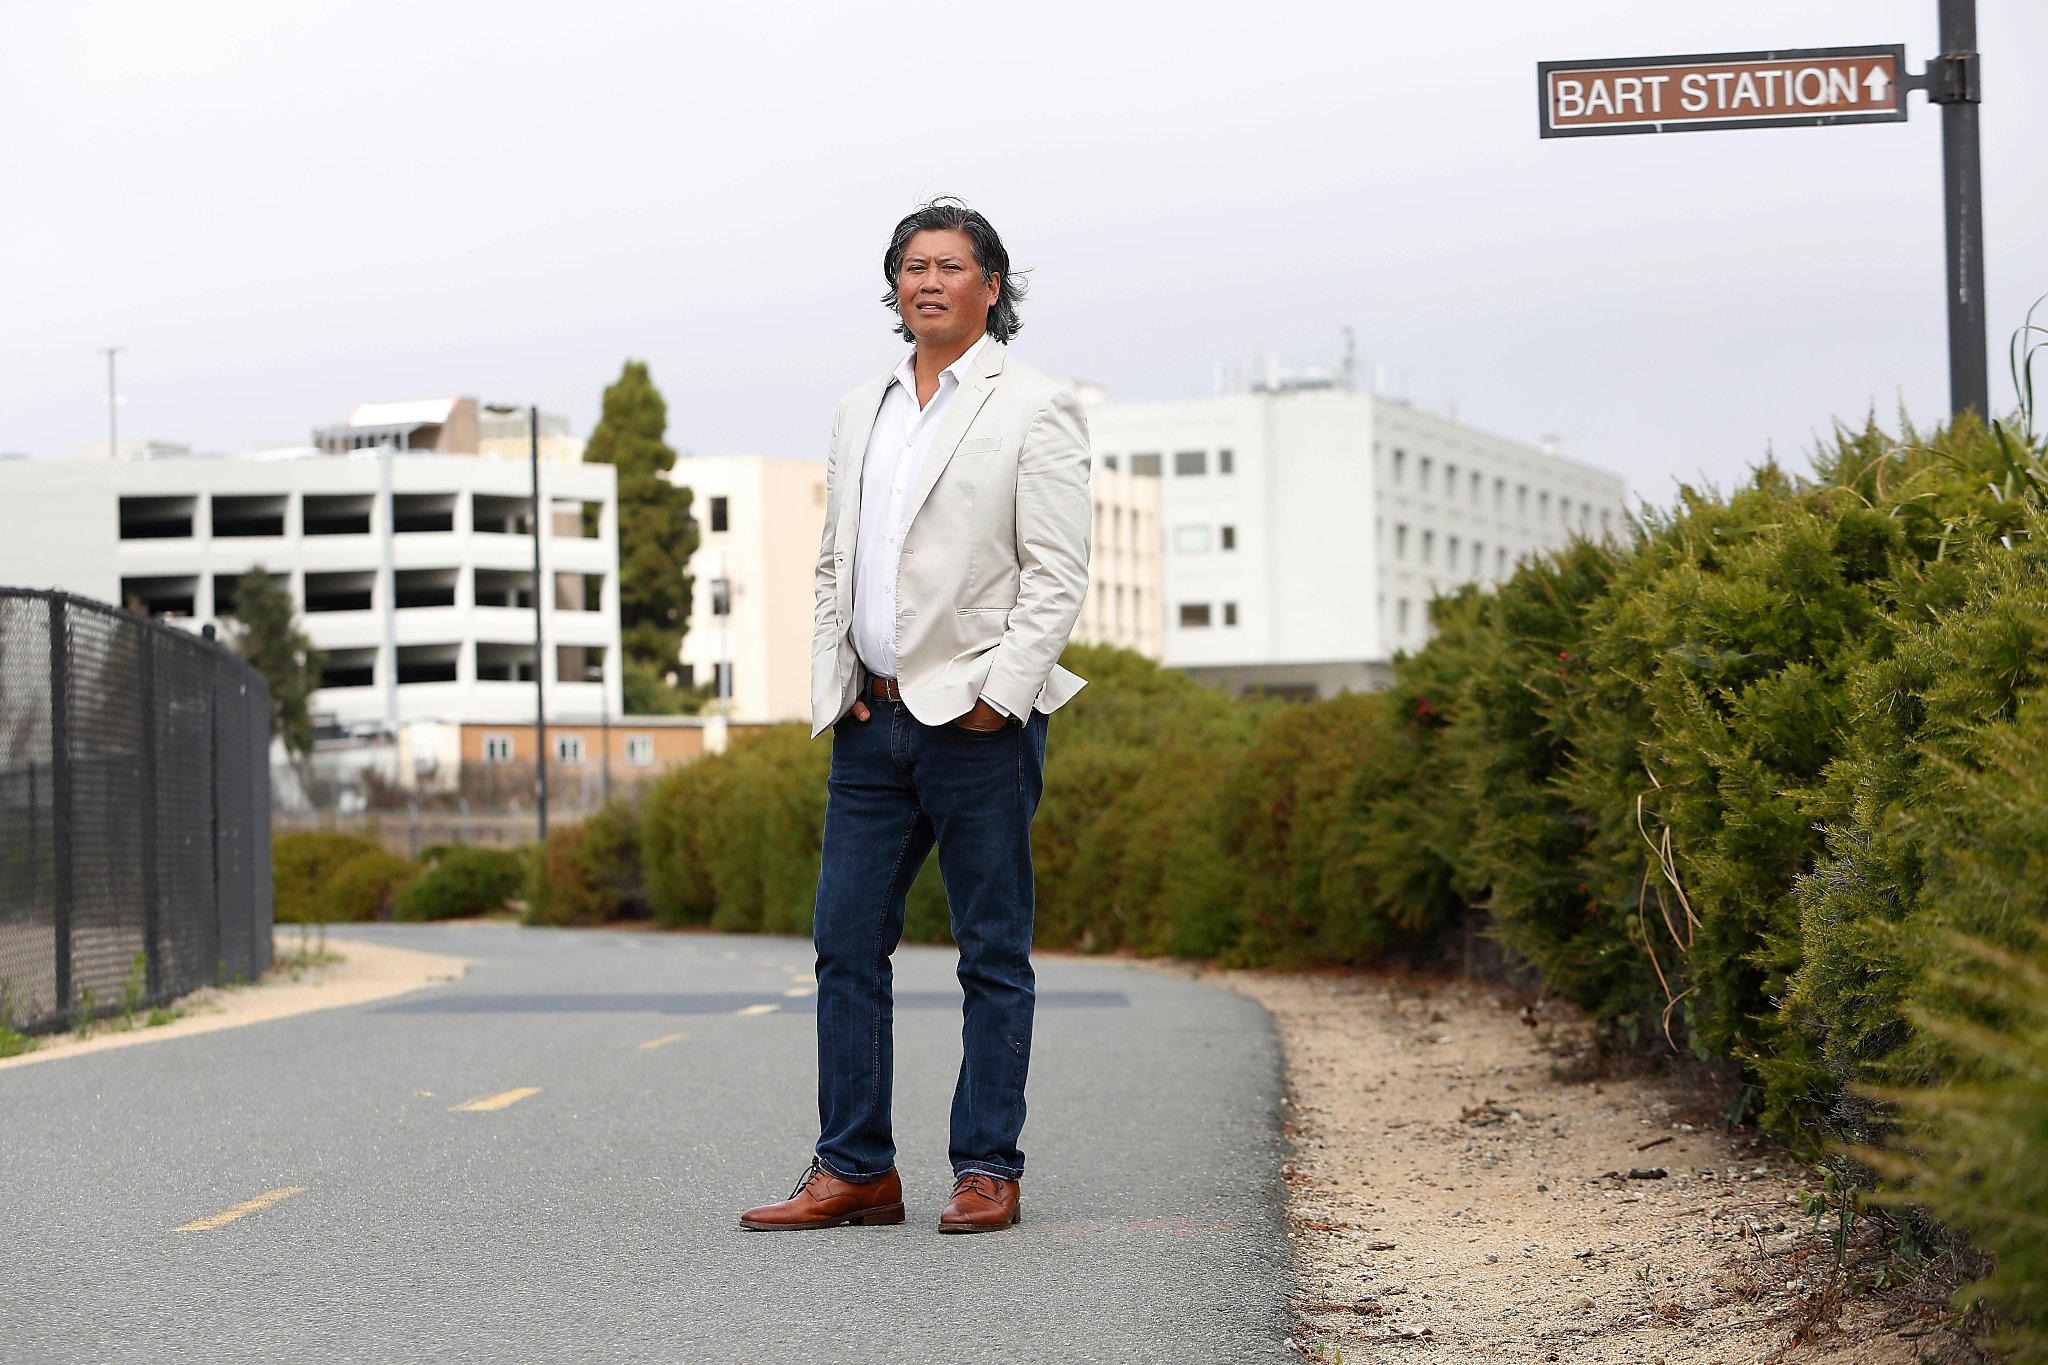 In midst of biotech boom, ‘all eyes’ on huge South San Francisco housing project - San Francisco Chronicle